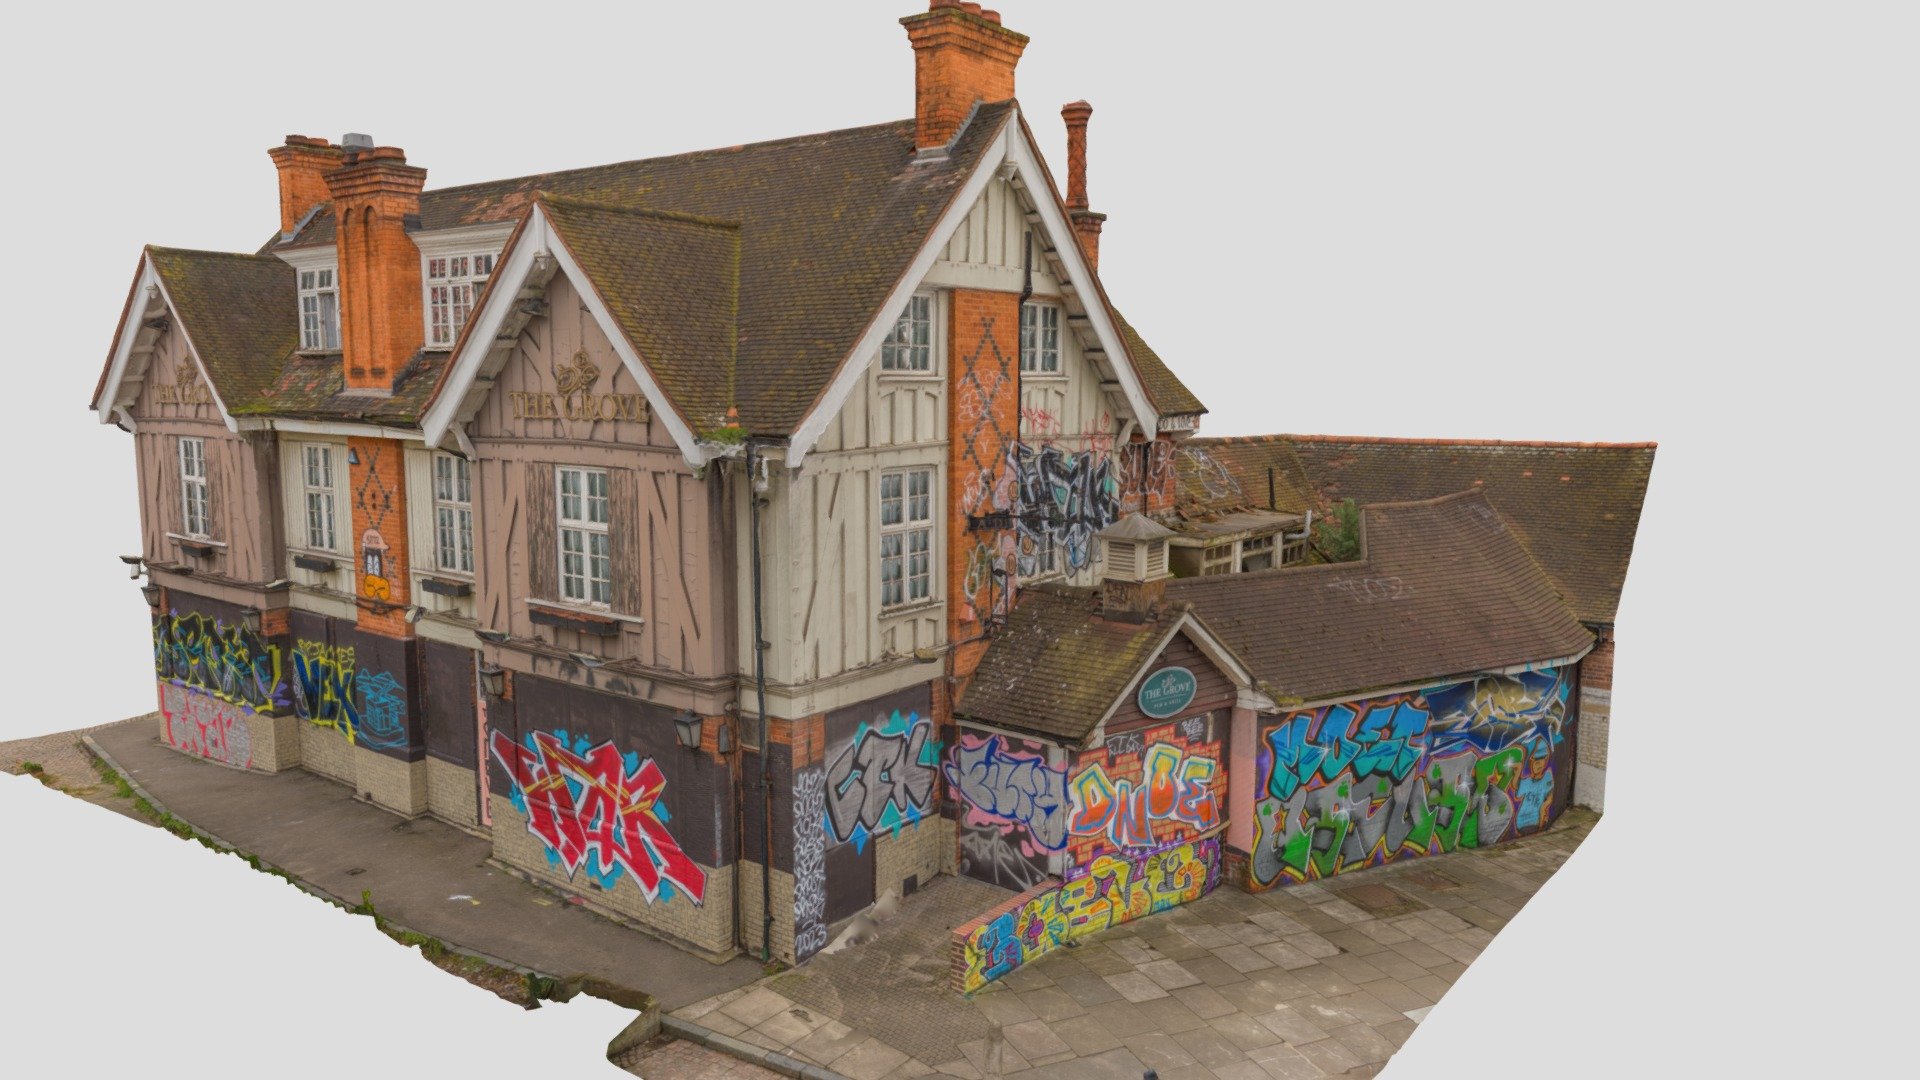 Photogrammetry Scan of an Abandoned Pub in south London. 

To ensure colour accuracy the Raw Photography was profiled with X-Rite ColorChecker and a unique profile created for sRGB Colour Gamut in Lightroom. 
Lods have been cleaned up to remove floating polygons and close holes (where possible). ote there are 2 diffuse maps with this package. The first diffuse map texture is the original photography he second map is called diffuse_3 and are delit for re-lighting so you have both options available to you.

Blender render of the 1 million poly asset (scene not included).




https://youtu.be/7aWmObts5JM

Zip package includes 4 LODs with 




1 million Polygon FBX model with 8k x10 UDIM Diffuse, Diffuse_3 Texture Maps and Normal Maps 

500k Polygon FBX model with 8k x5 UDIM Diffuse, Diffuse_3 Texture Maps and Normal Maps

200k Polygon FBX model with 8k x4 UDIM Diffuse, Diffuse_3 Texture Maps and Normal Maps 

50k Polygon FBX model with 8k x2 UDIM Diffuse, Diffuse_3 Texture Maps and Normal Maps
 - Abandoned Pub - Buy Royalty Free 3D model by Kieron Helsdon (@ronski) 3d model